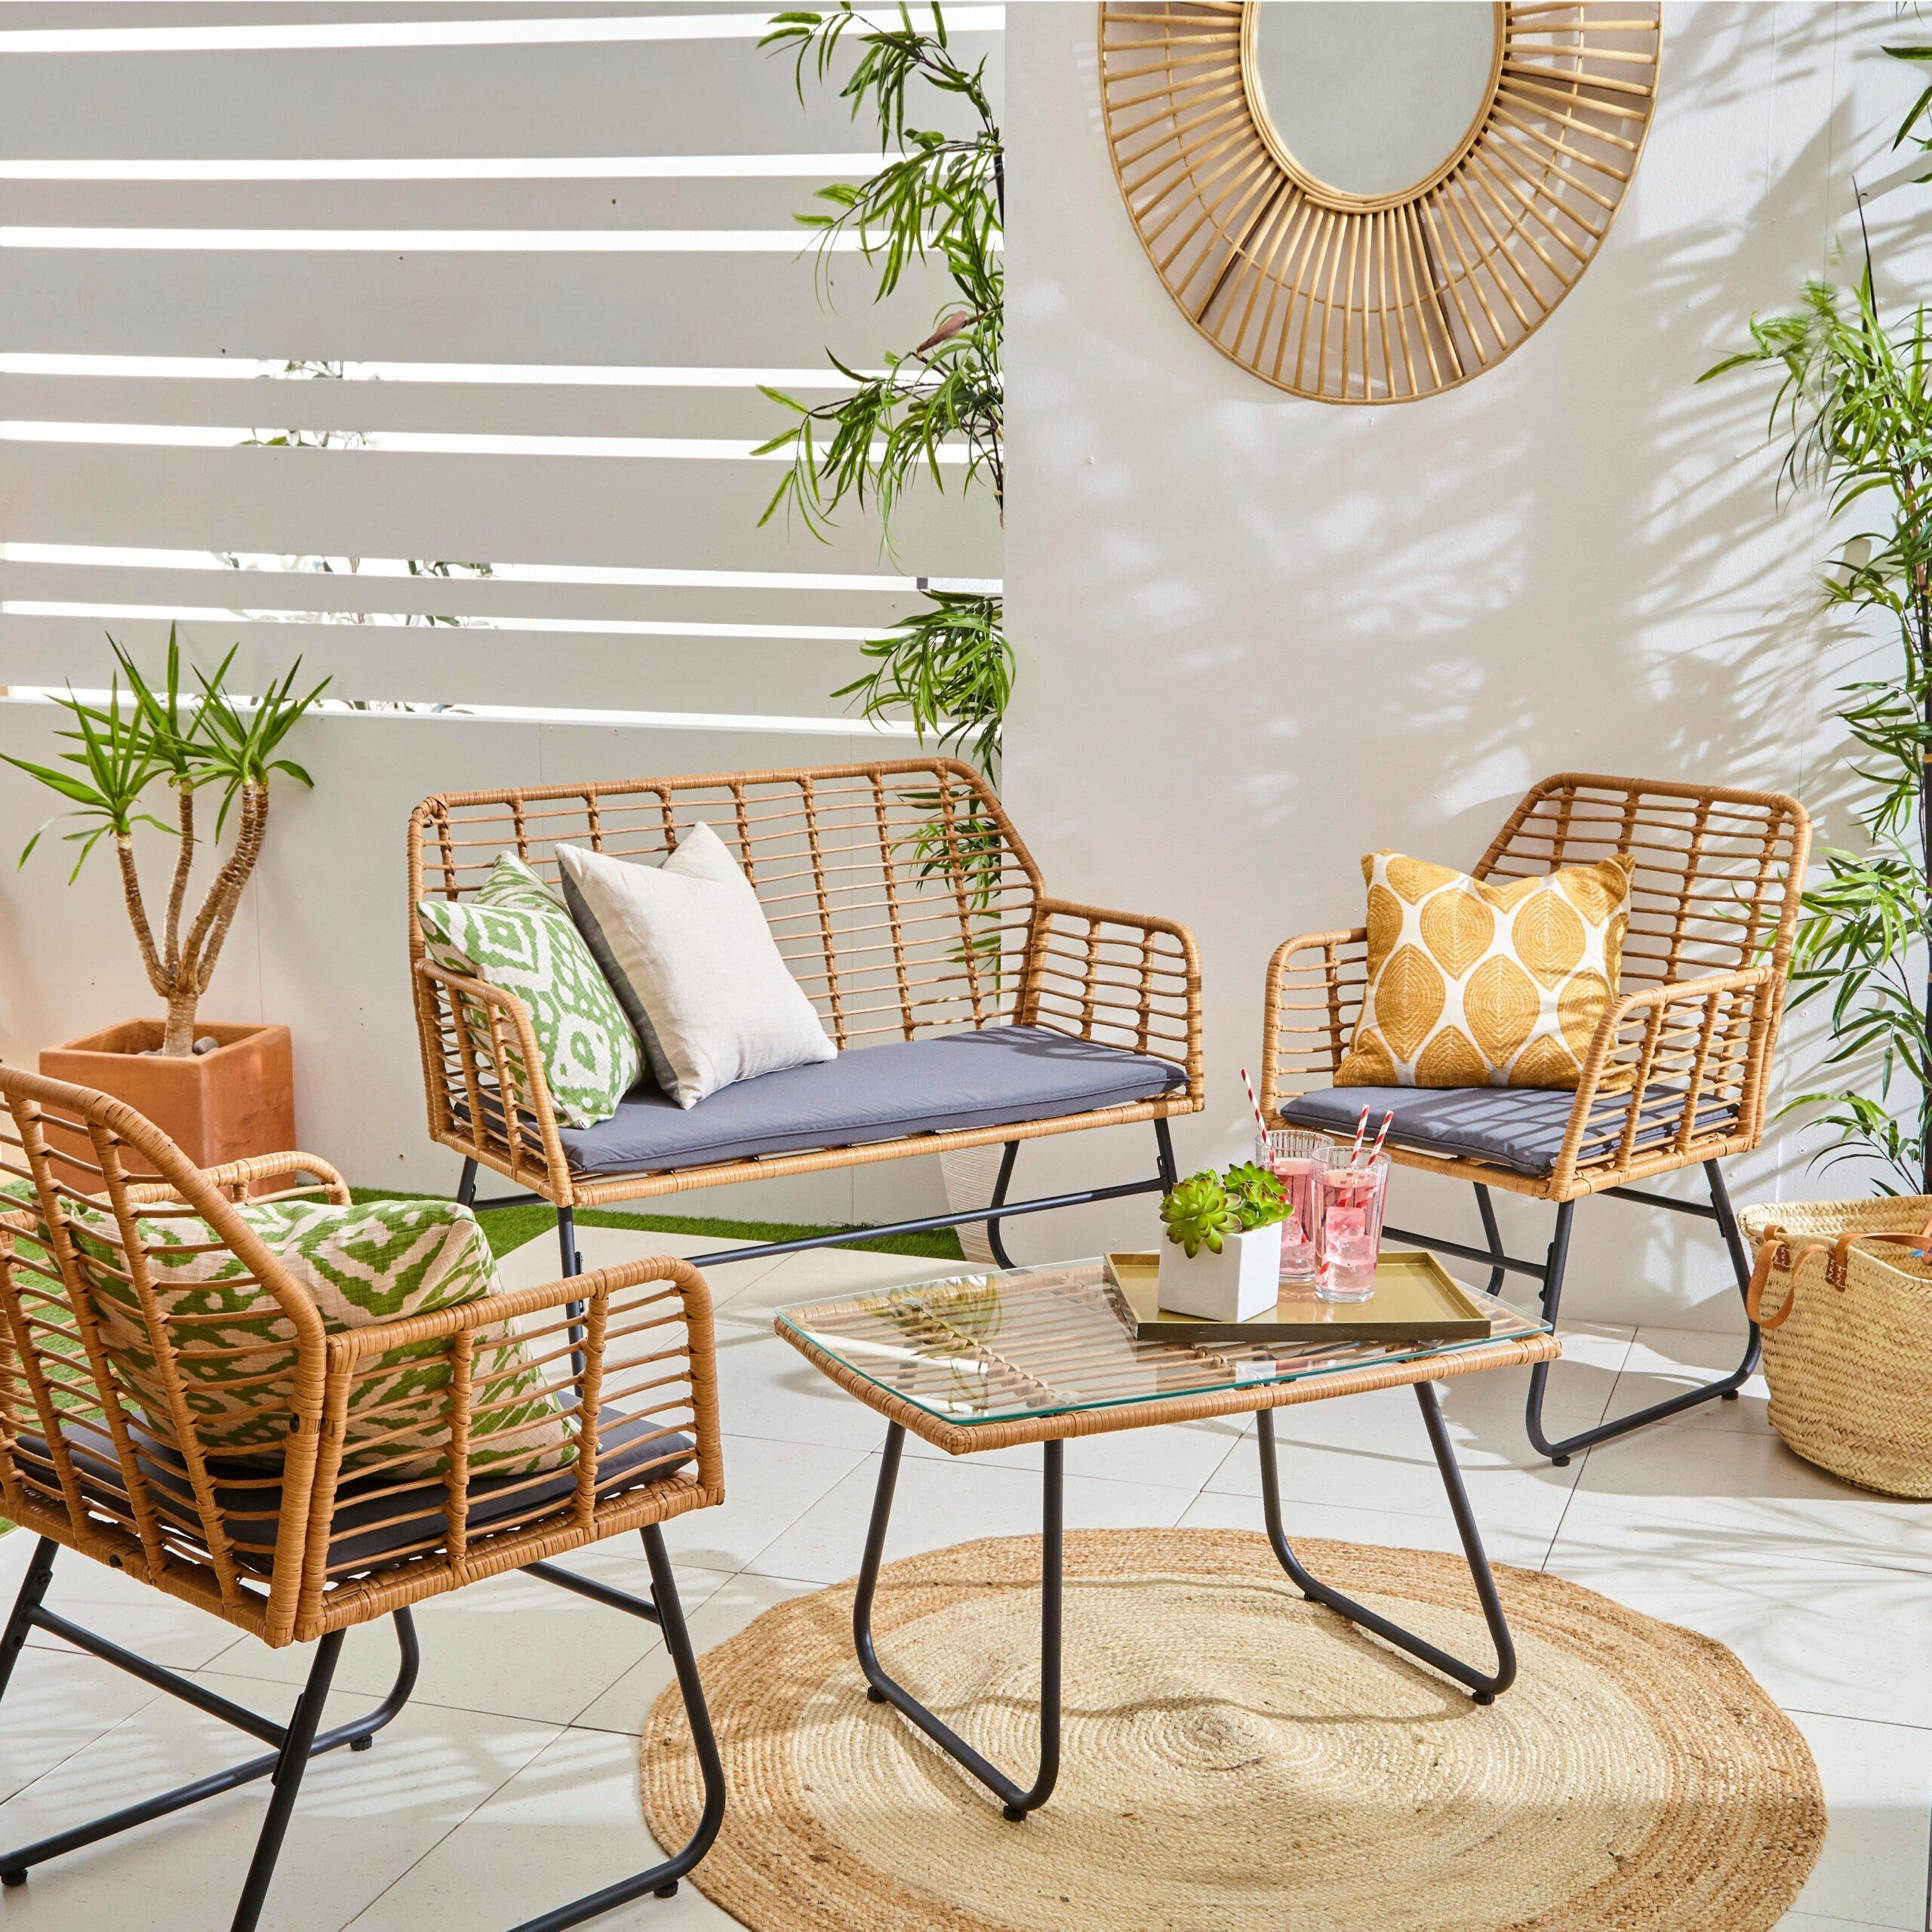 4 Piece Wicker Bamboo Style Garden Sofa, Table & Chairs Set - image 1